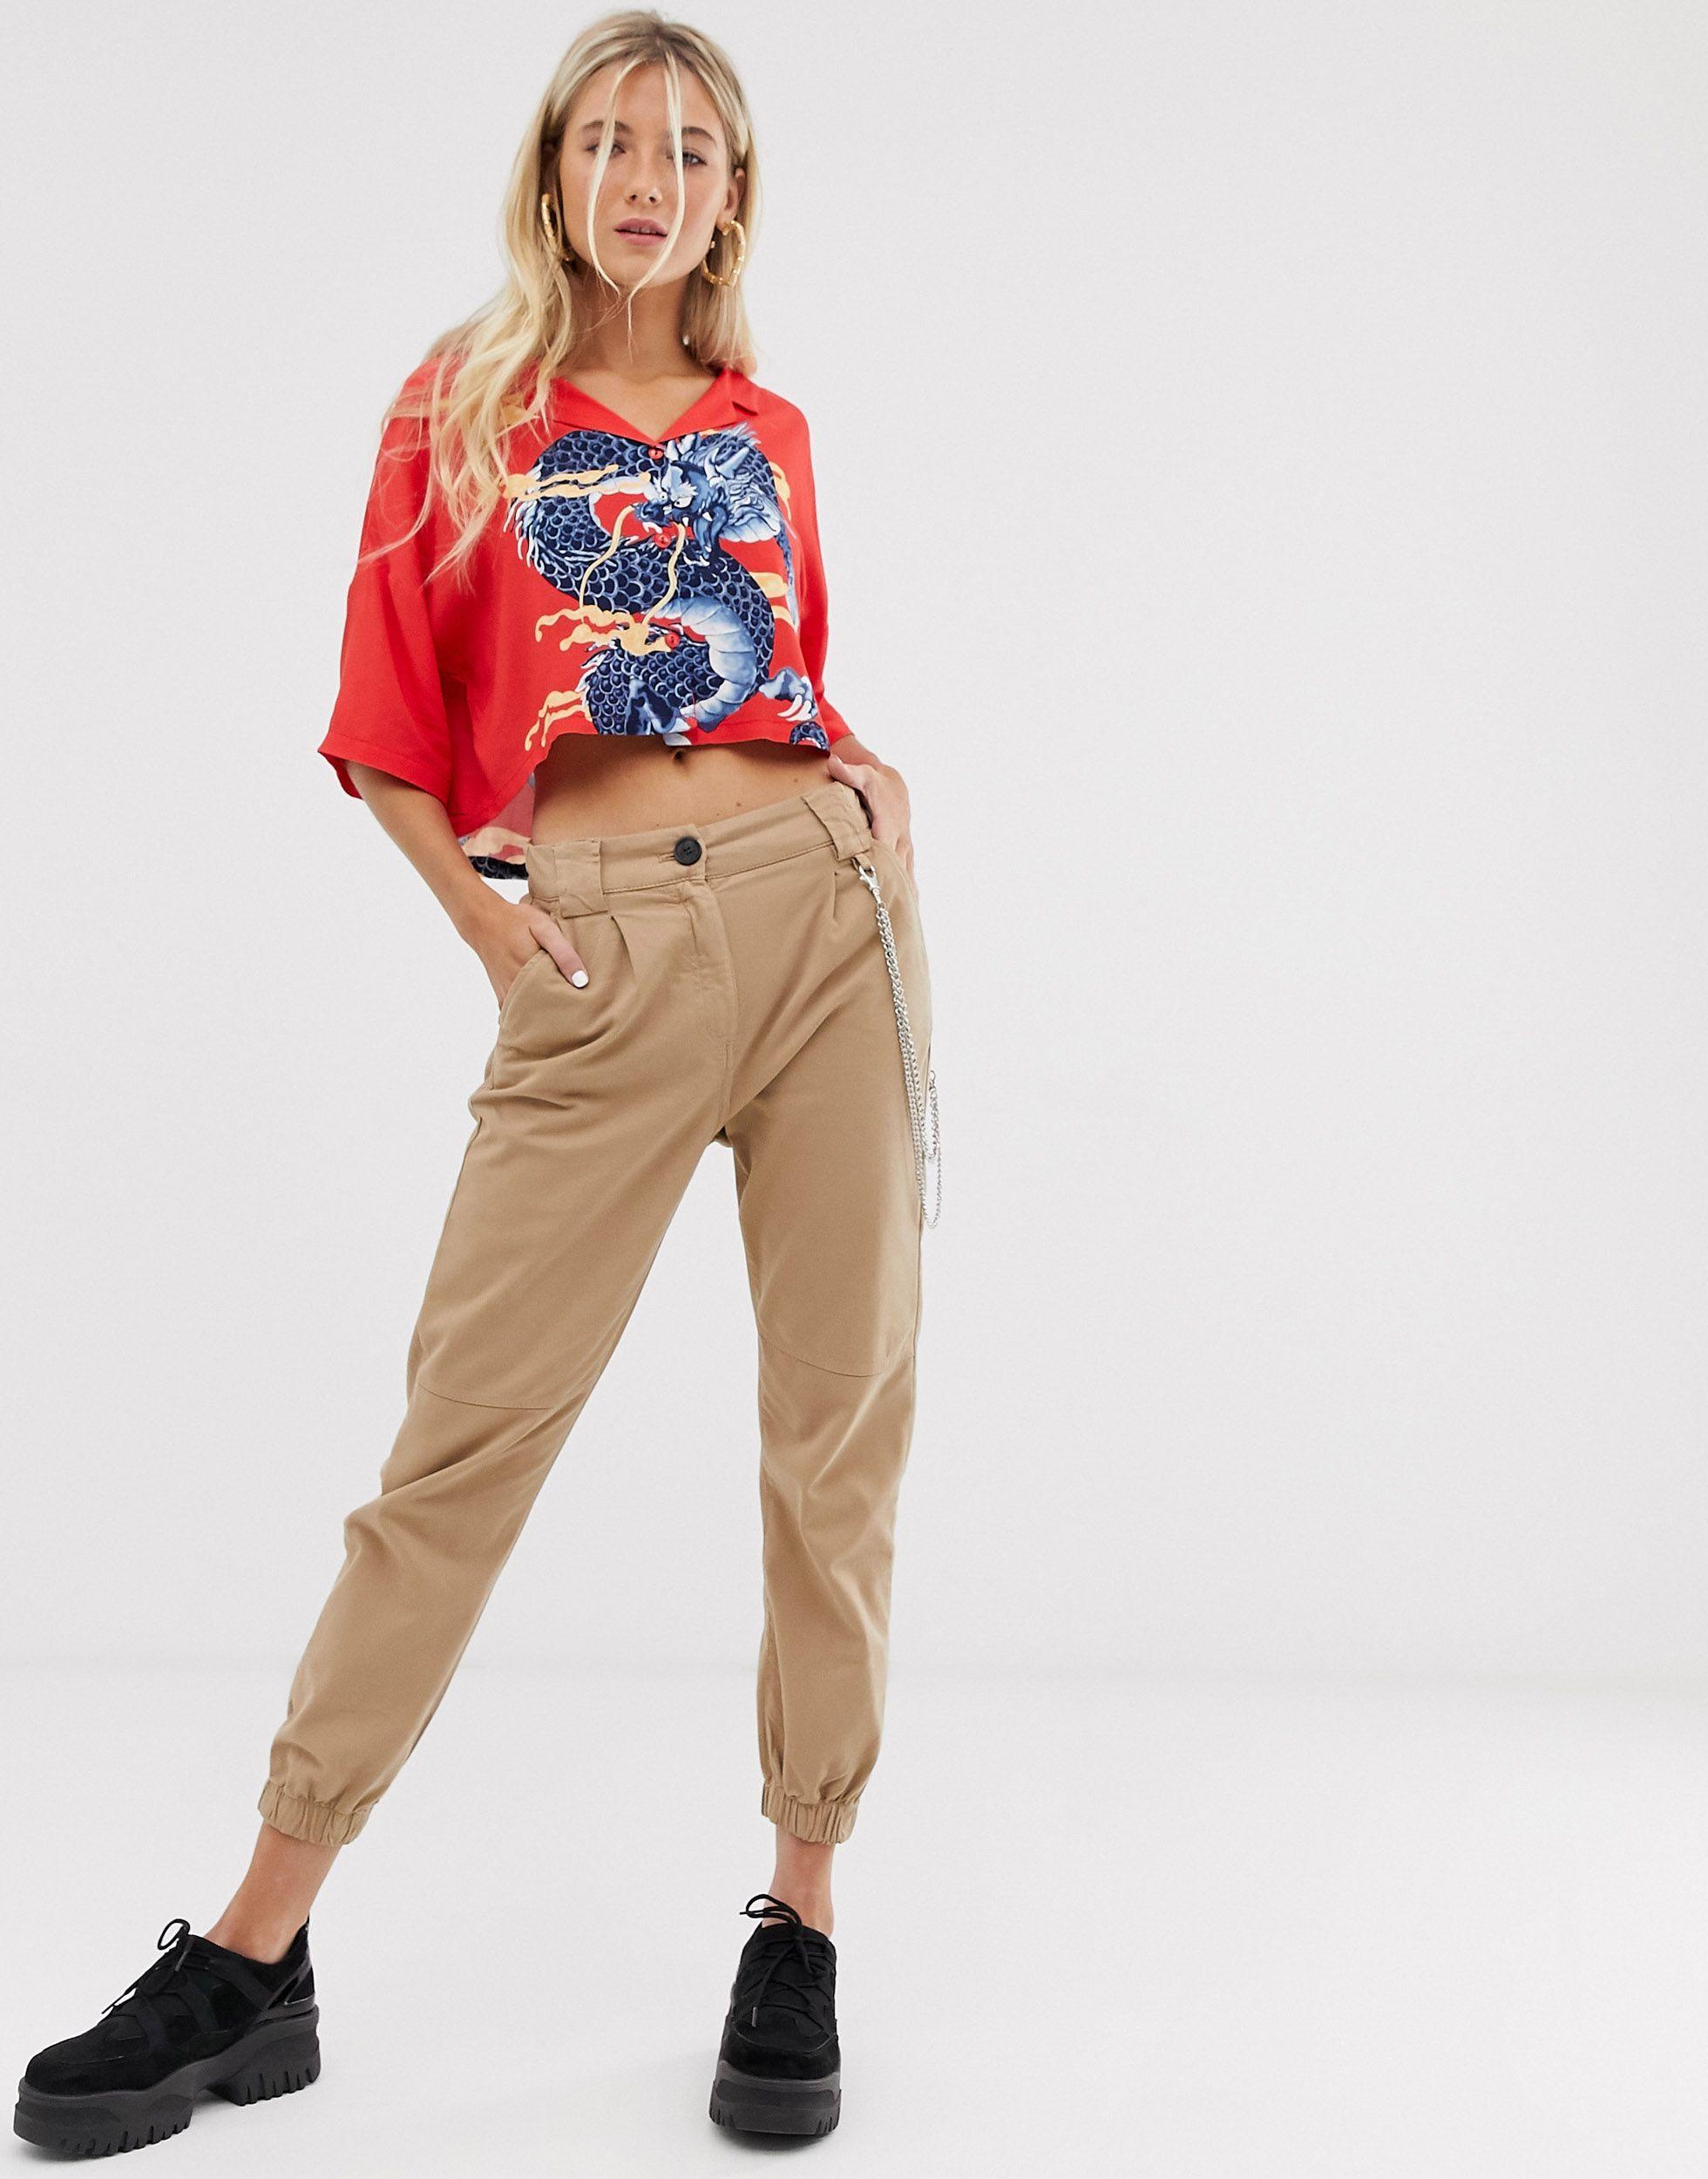 Cargo Pants With Chain Bershka Best Sale, GET 55% OFF, ricettecuco.it